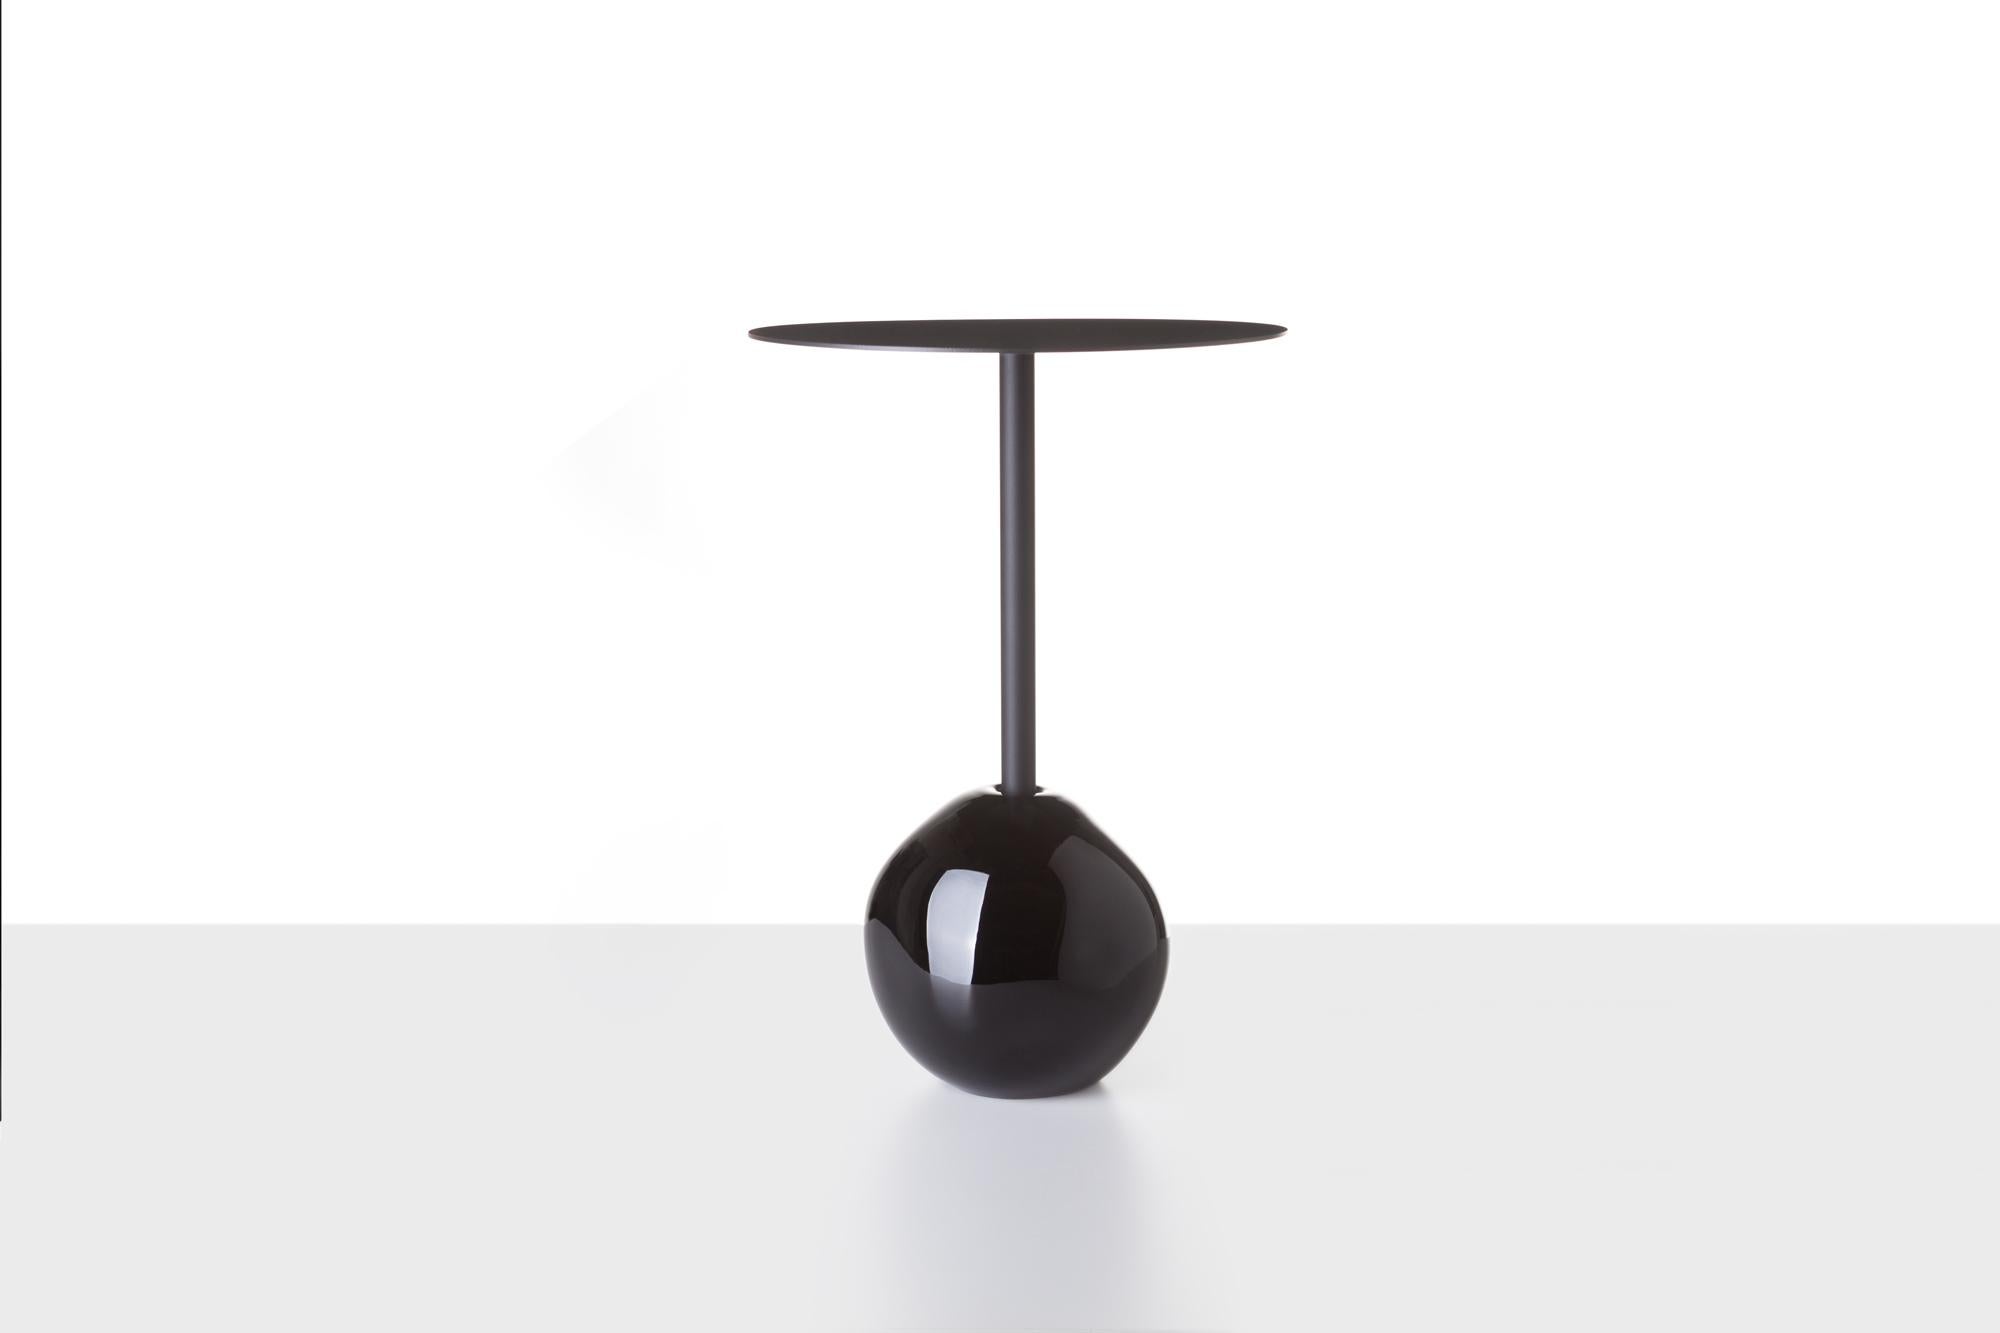 Antimatter table by Dechem Studio.
Dimensions: D 40 x H 37 cm.
Materials: glass, metal.

Based on the same principle as our Antimatter Vase and Lamp, this table is comprised of a heavy and massive organic glass base and a black coated brass leg